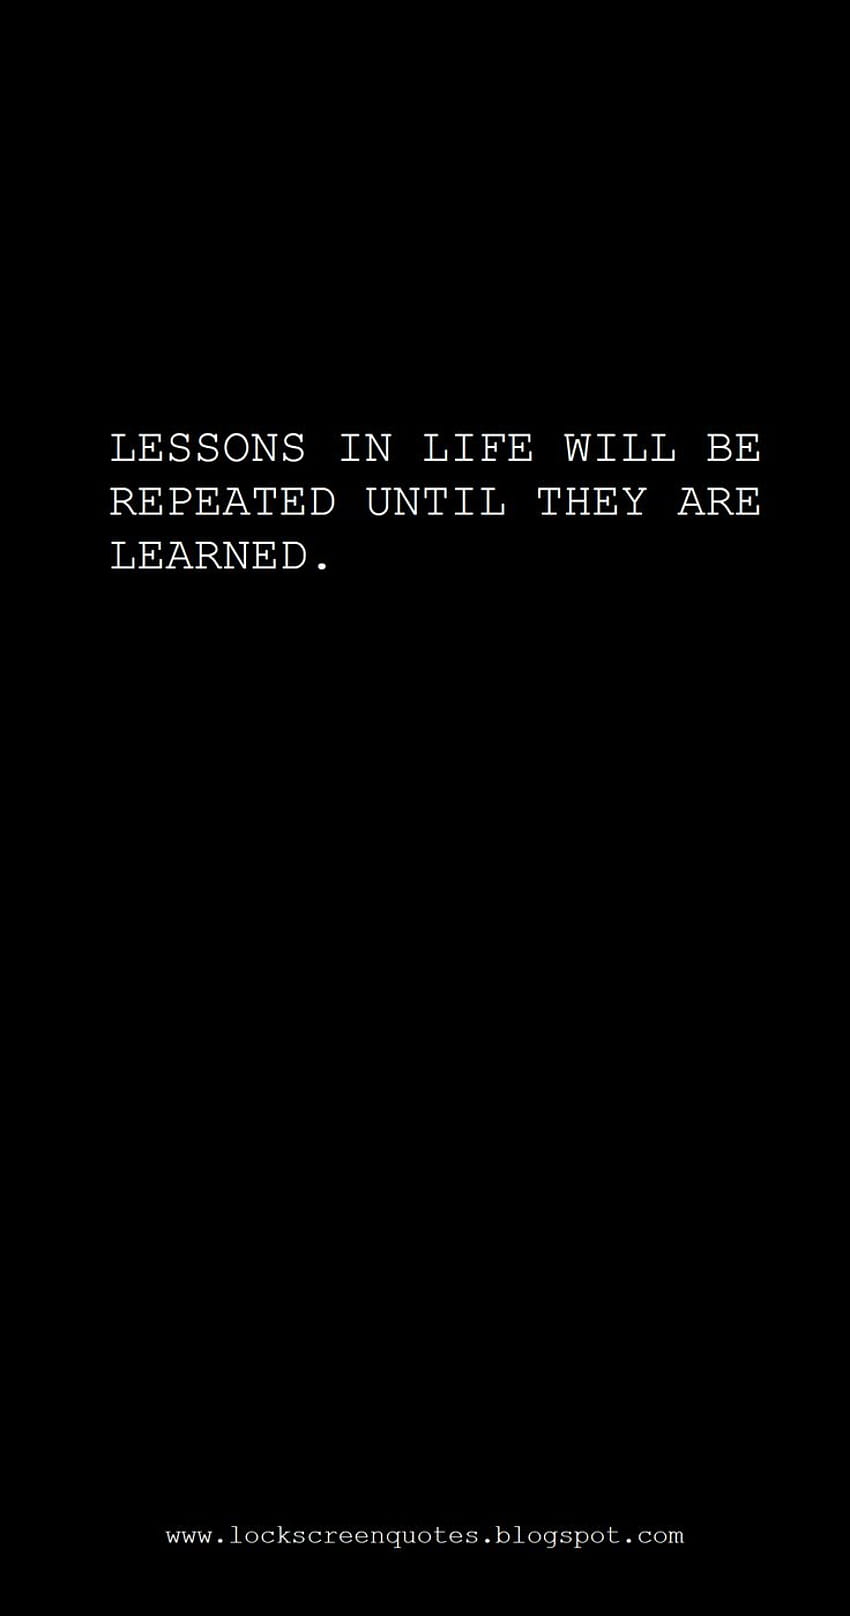 Visit my website for more Quotes like this. https://lockscreenquotes.blogspot/, life lessons HD phone wallpaper